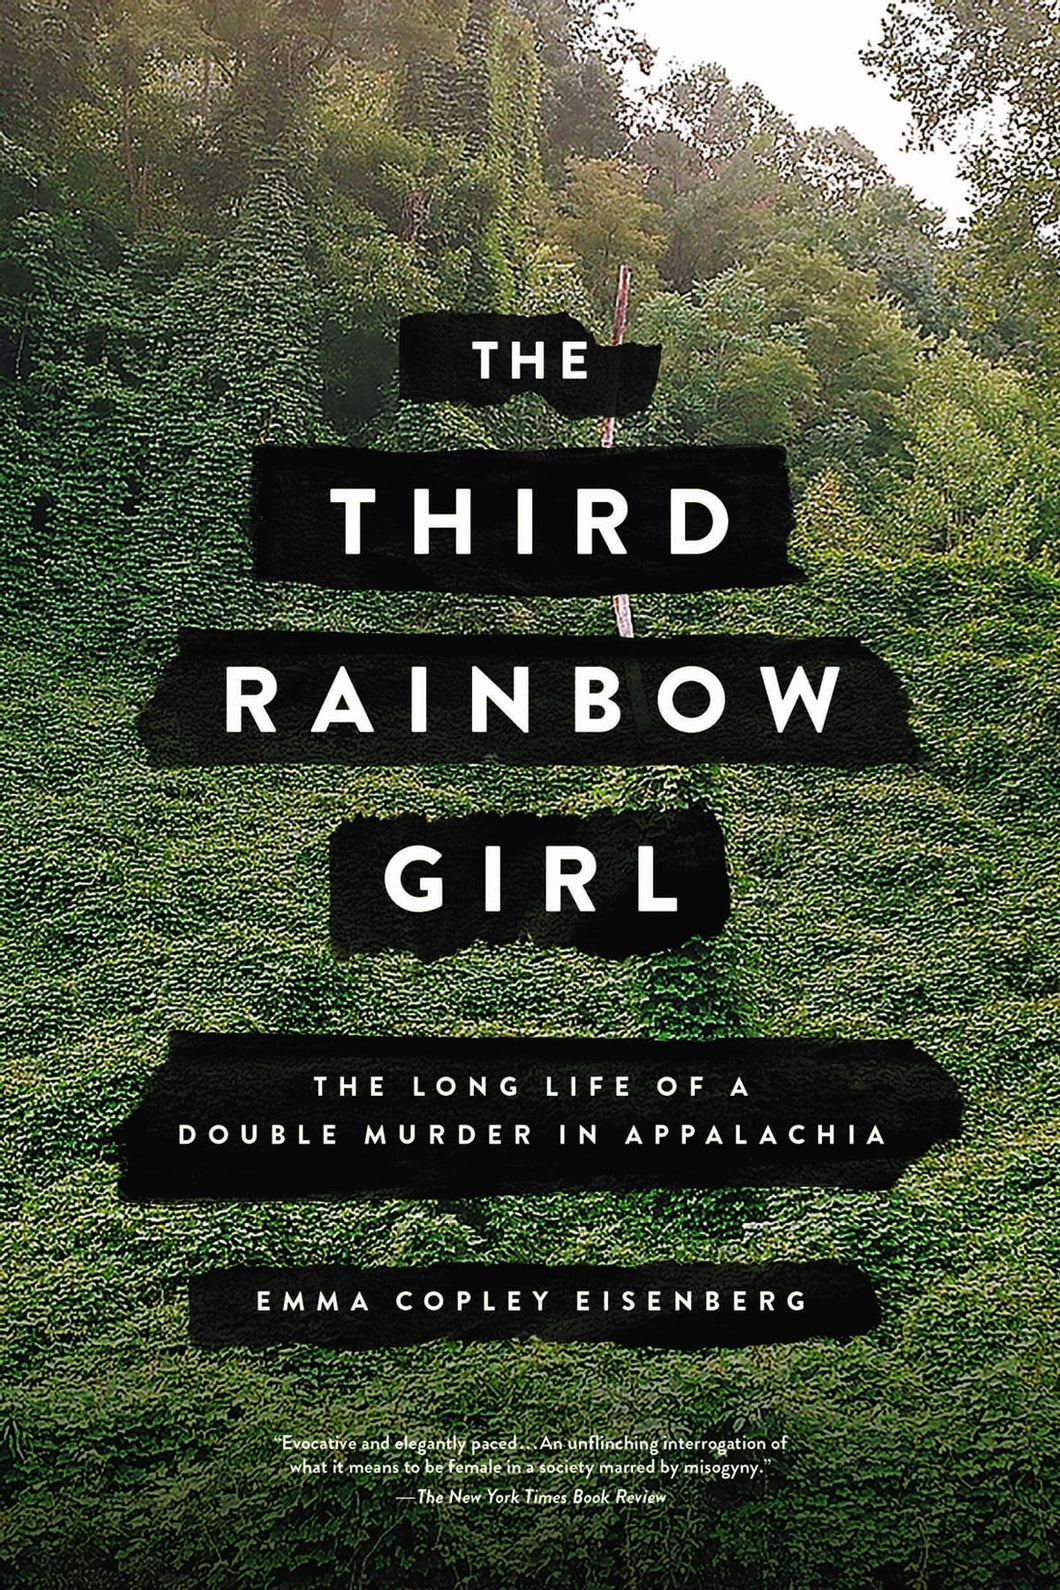 The Third Rainbow Girl: The Long Life of a Double Murder in Appalachia by Emma Copley Eisenberg / Hardcover or Paperback - NEW BOOK OR BOOK BOX